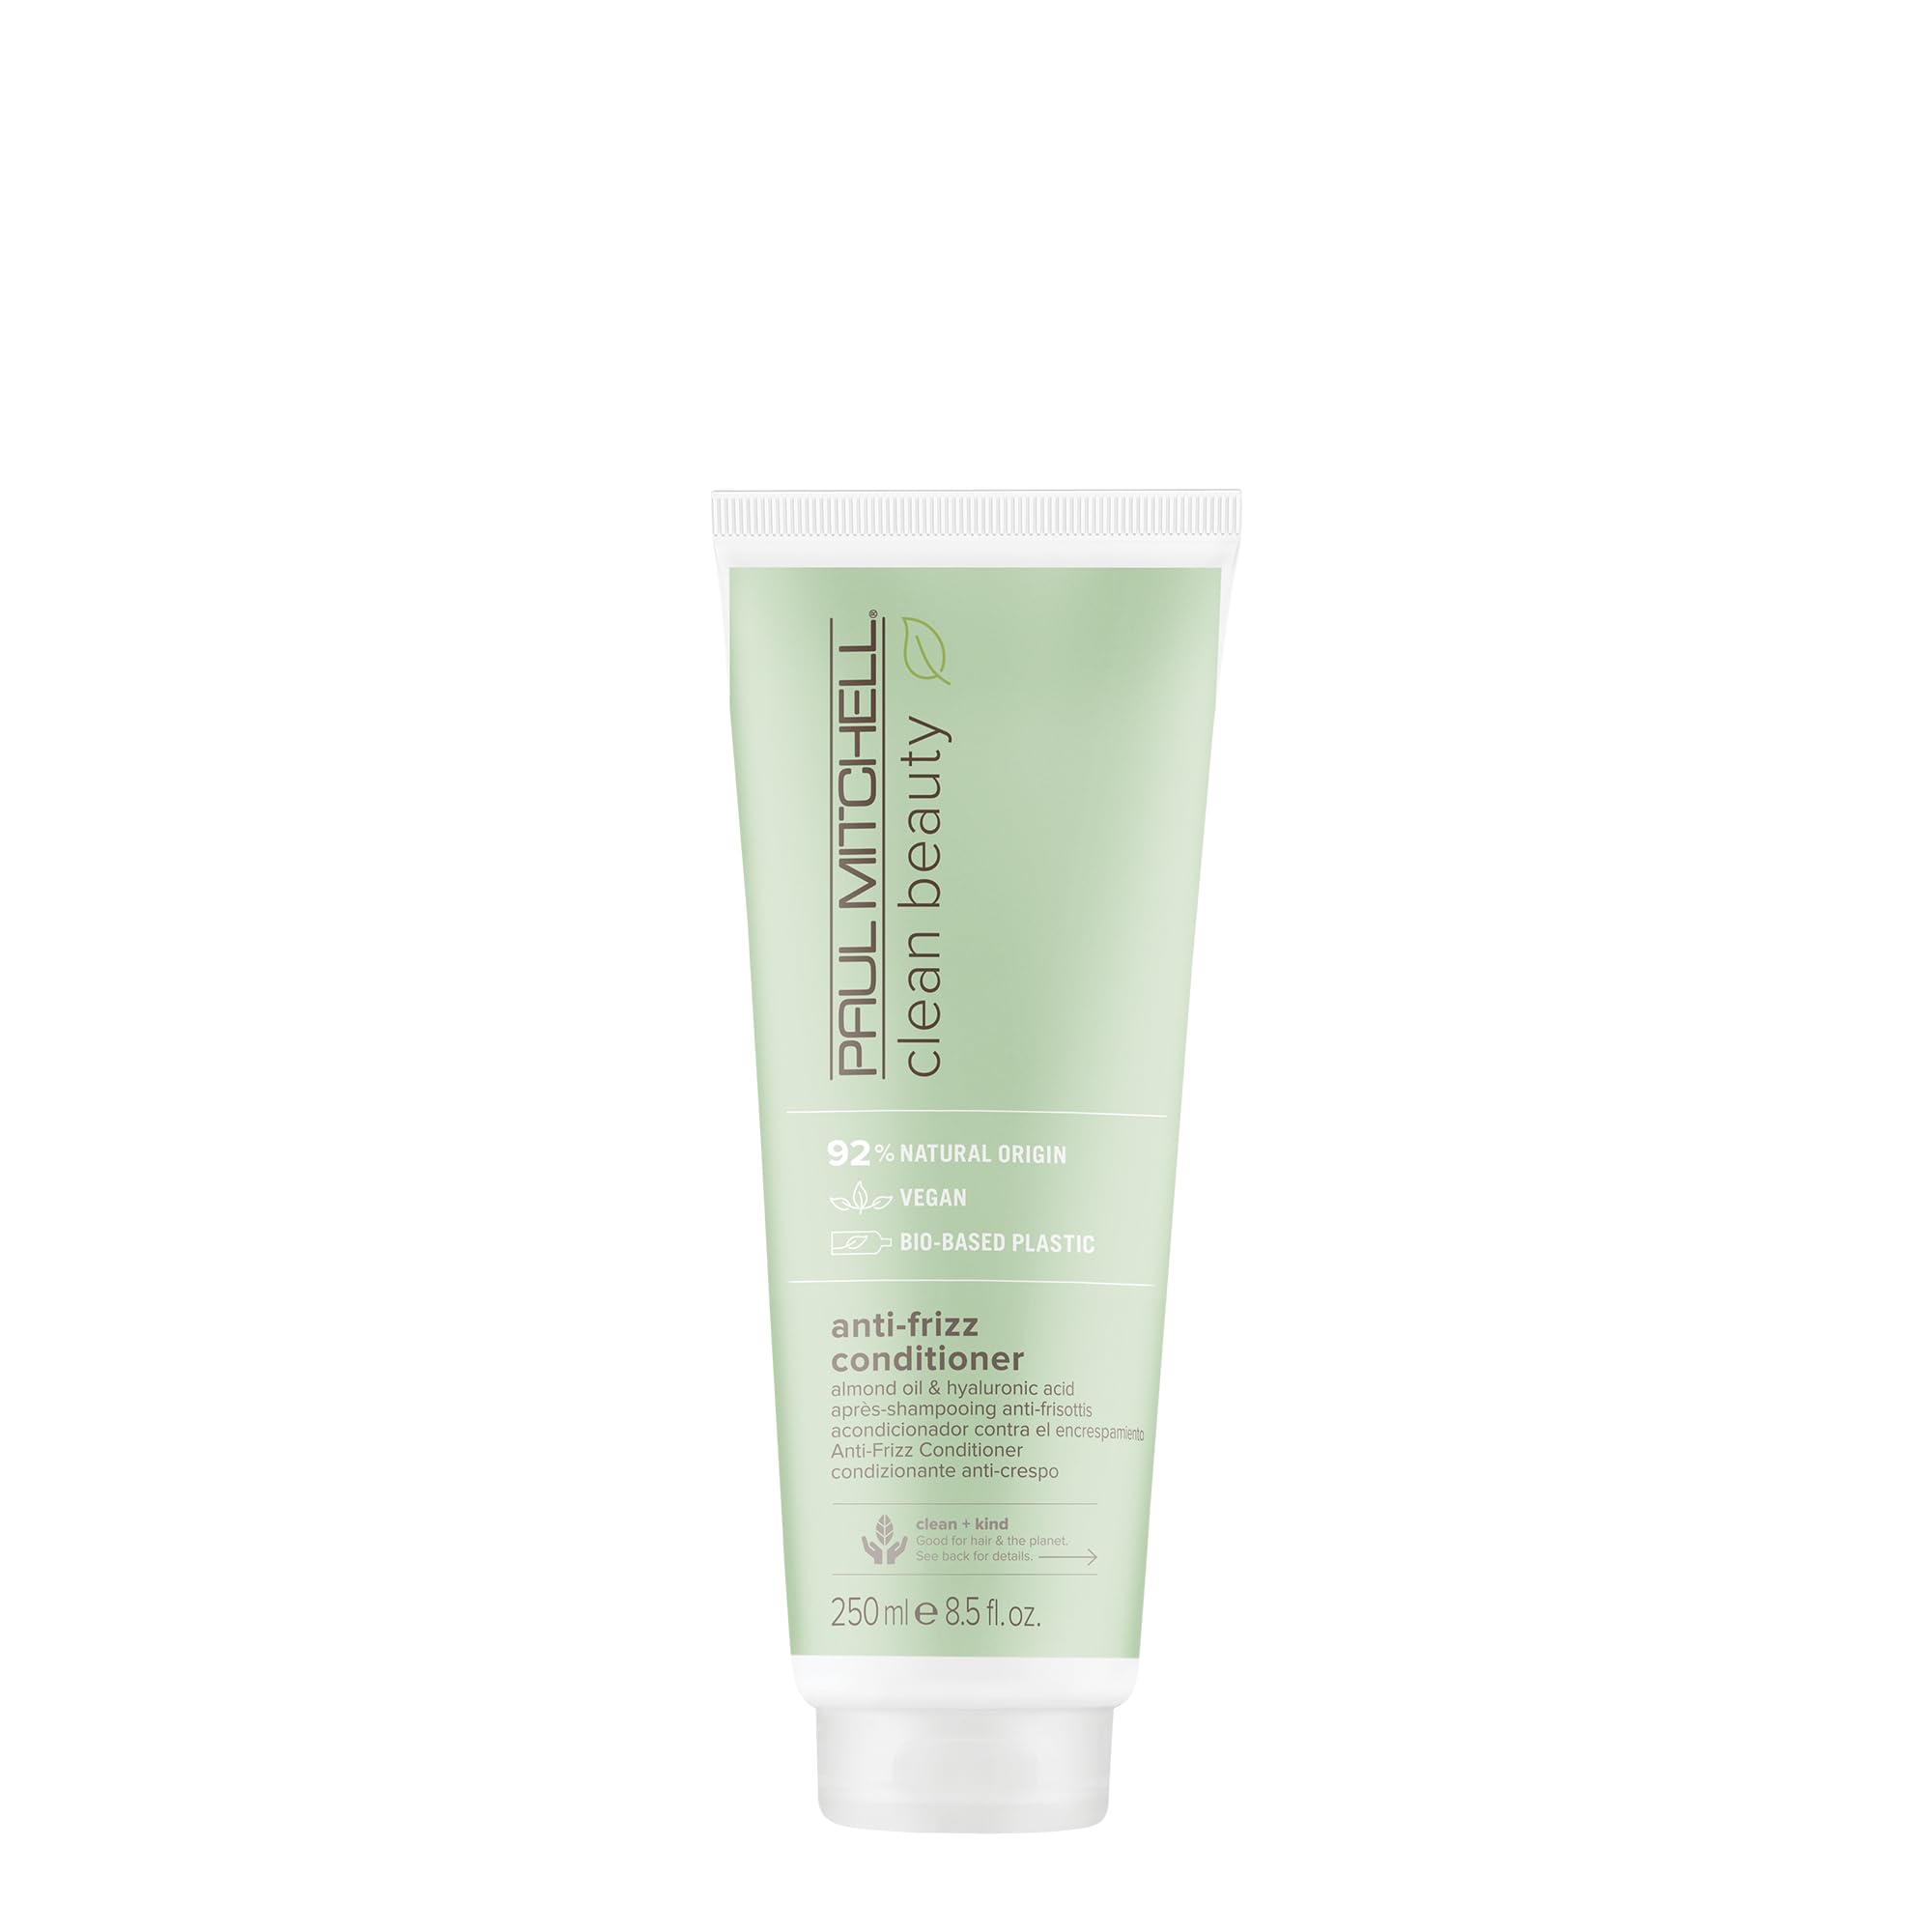 Paul Mitchell Clean Beauty Anti-Frizz Conditioner, Ultra-Rich Formula, Improves Elasticity, For Frizz-Prone Hair